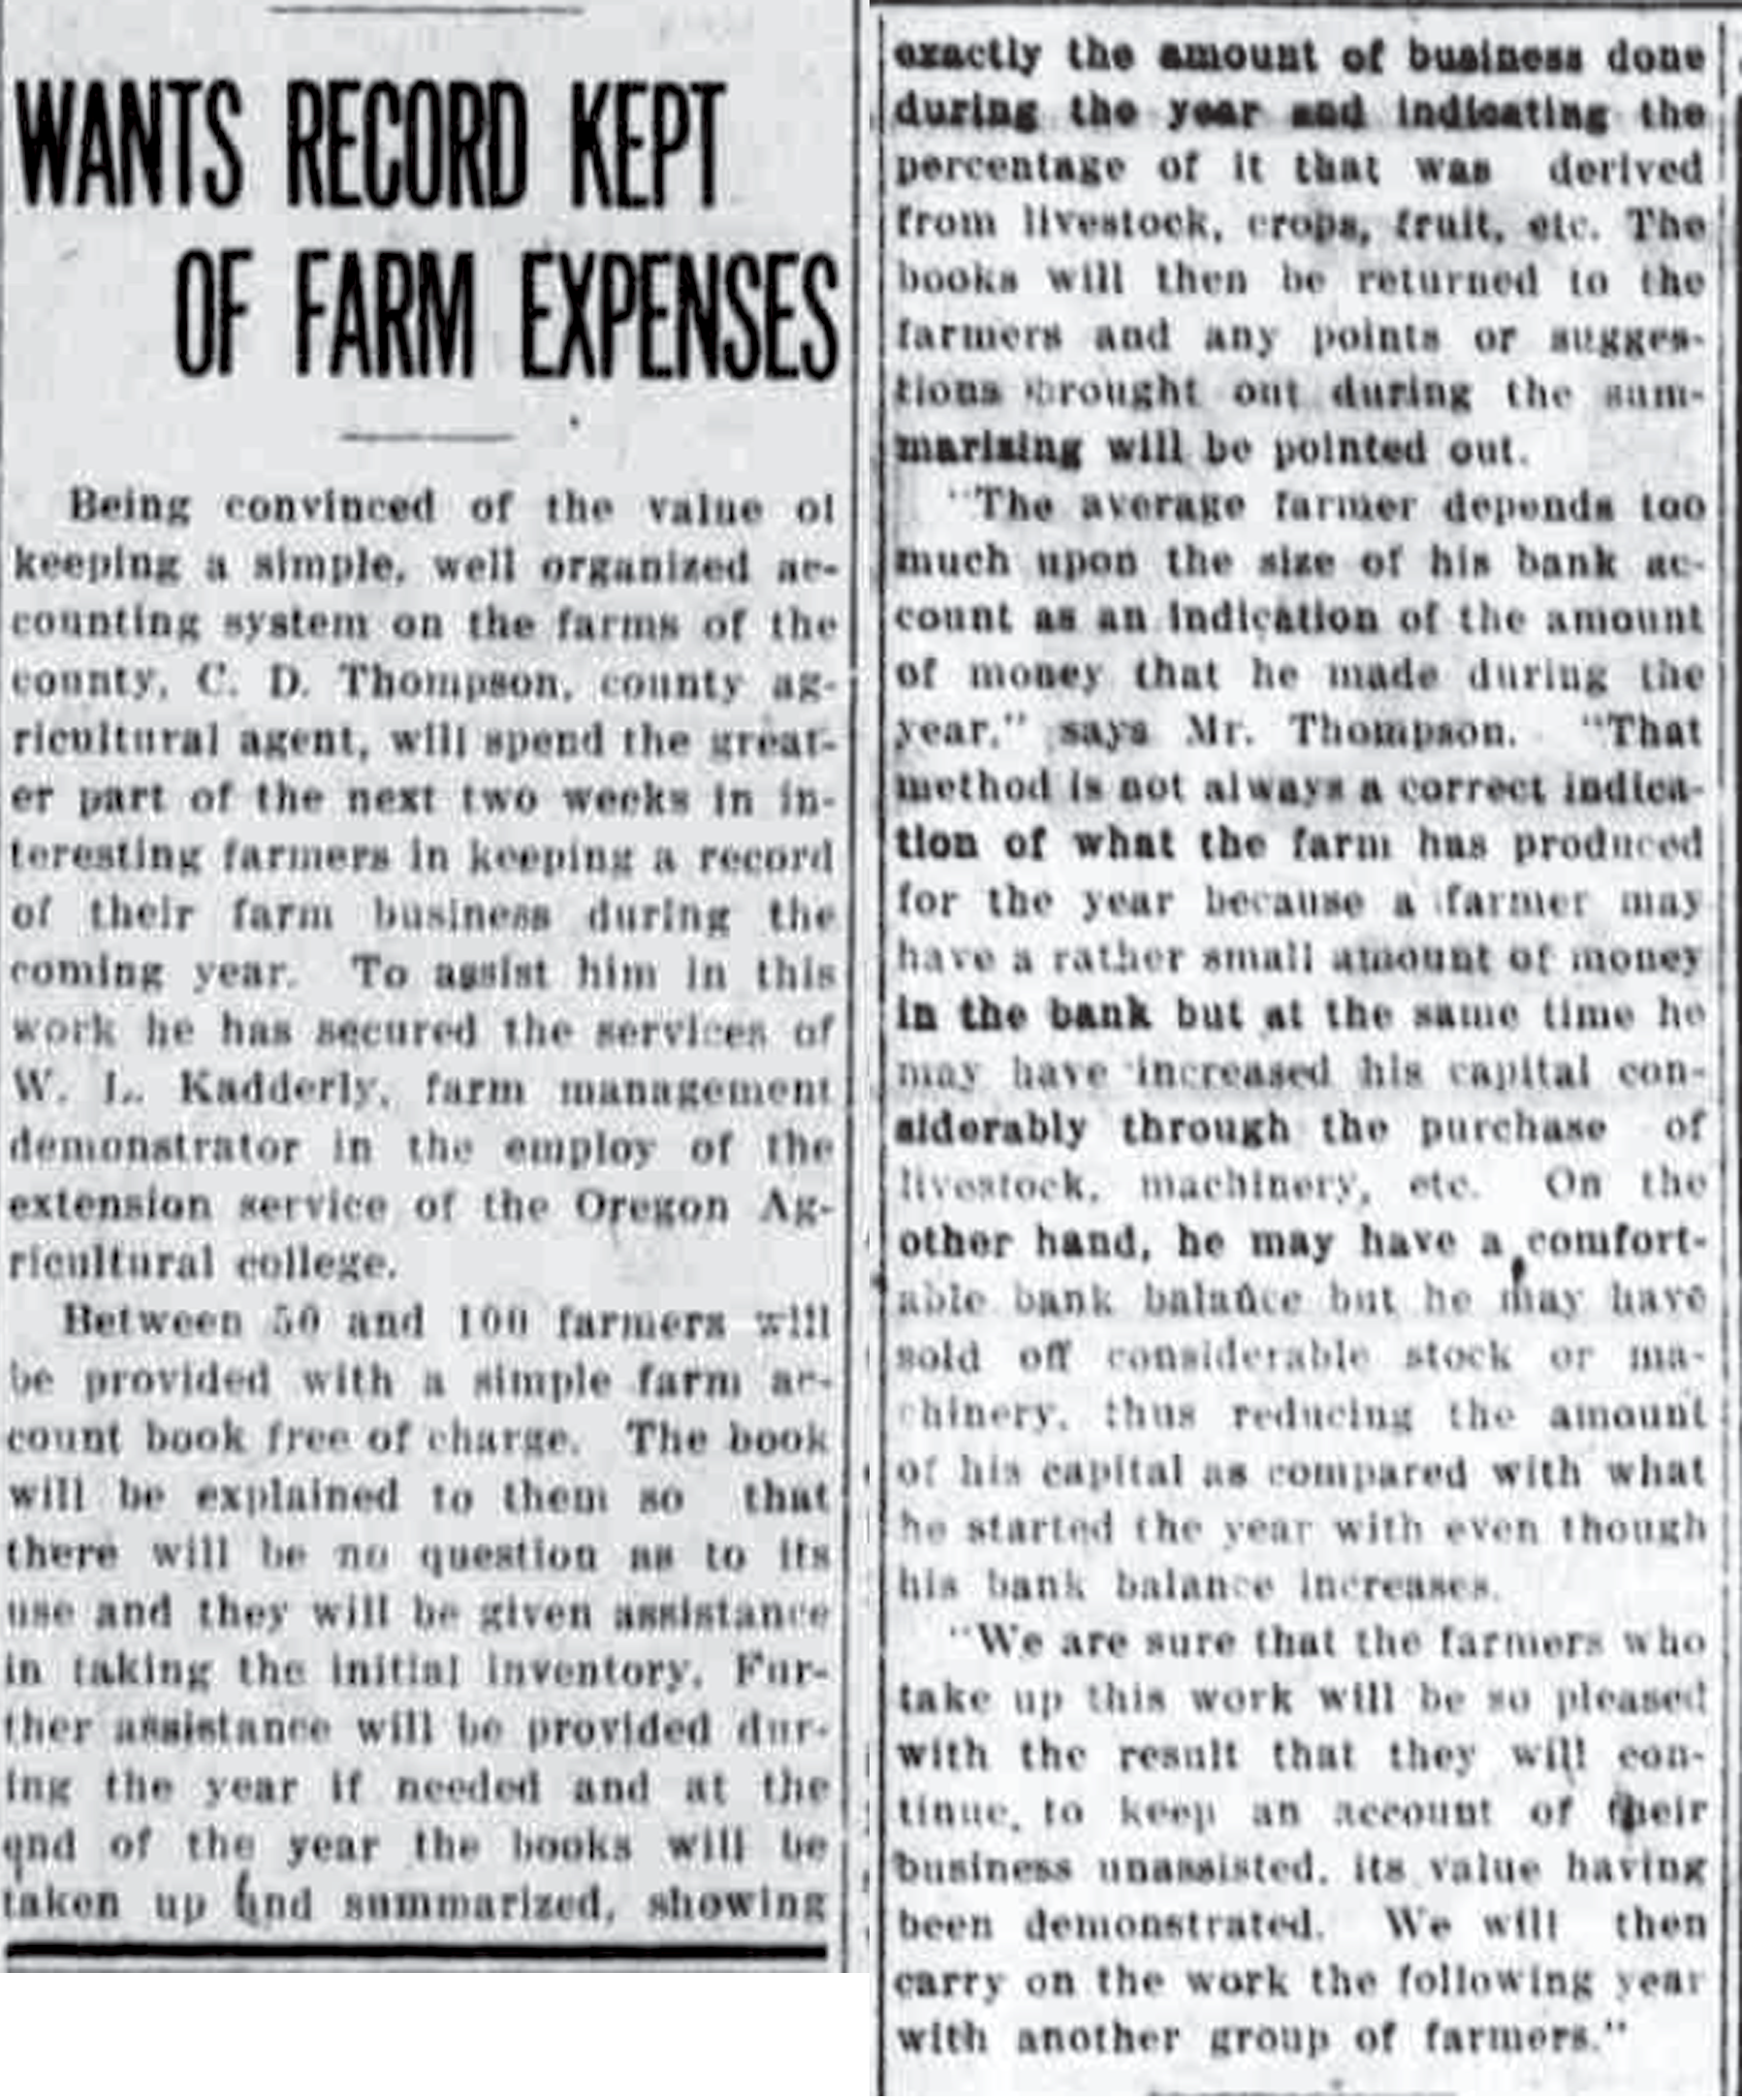 Black and white image of newspaper article entitled "Wants Record Kept of Farm Expenses"